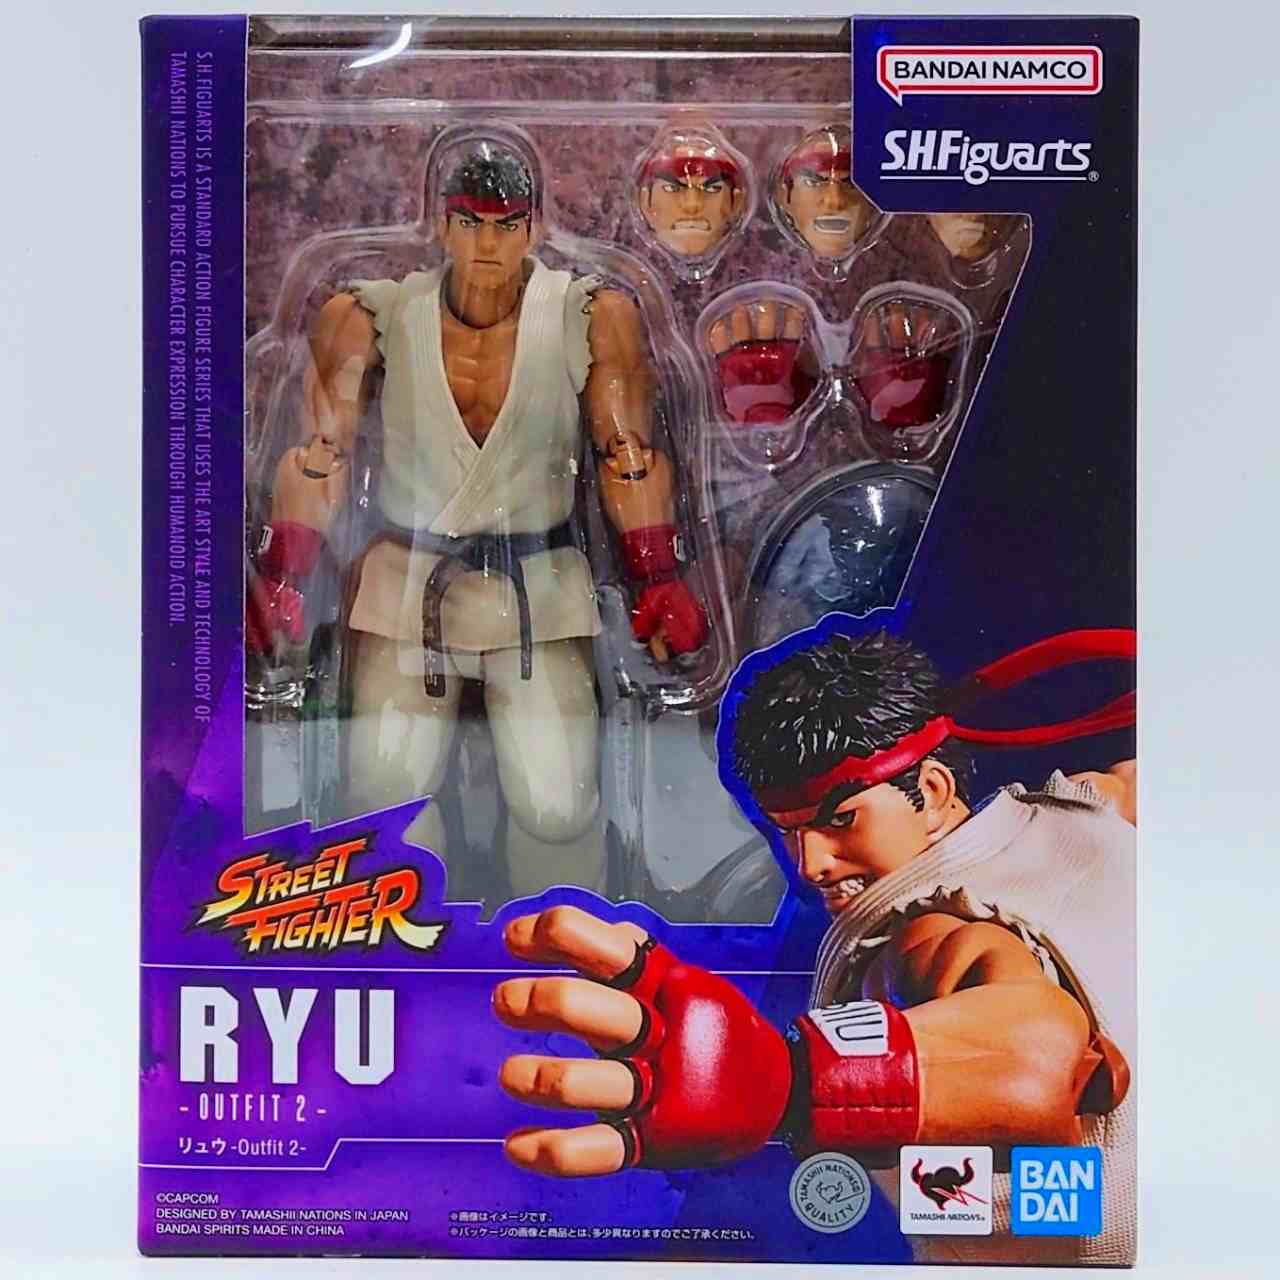 S.H.Figuarts Ryu Outfit 2